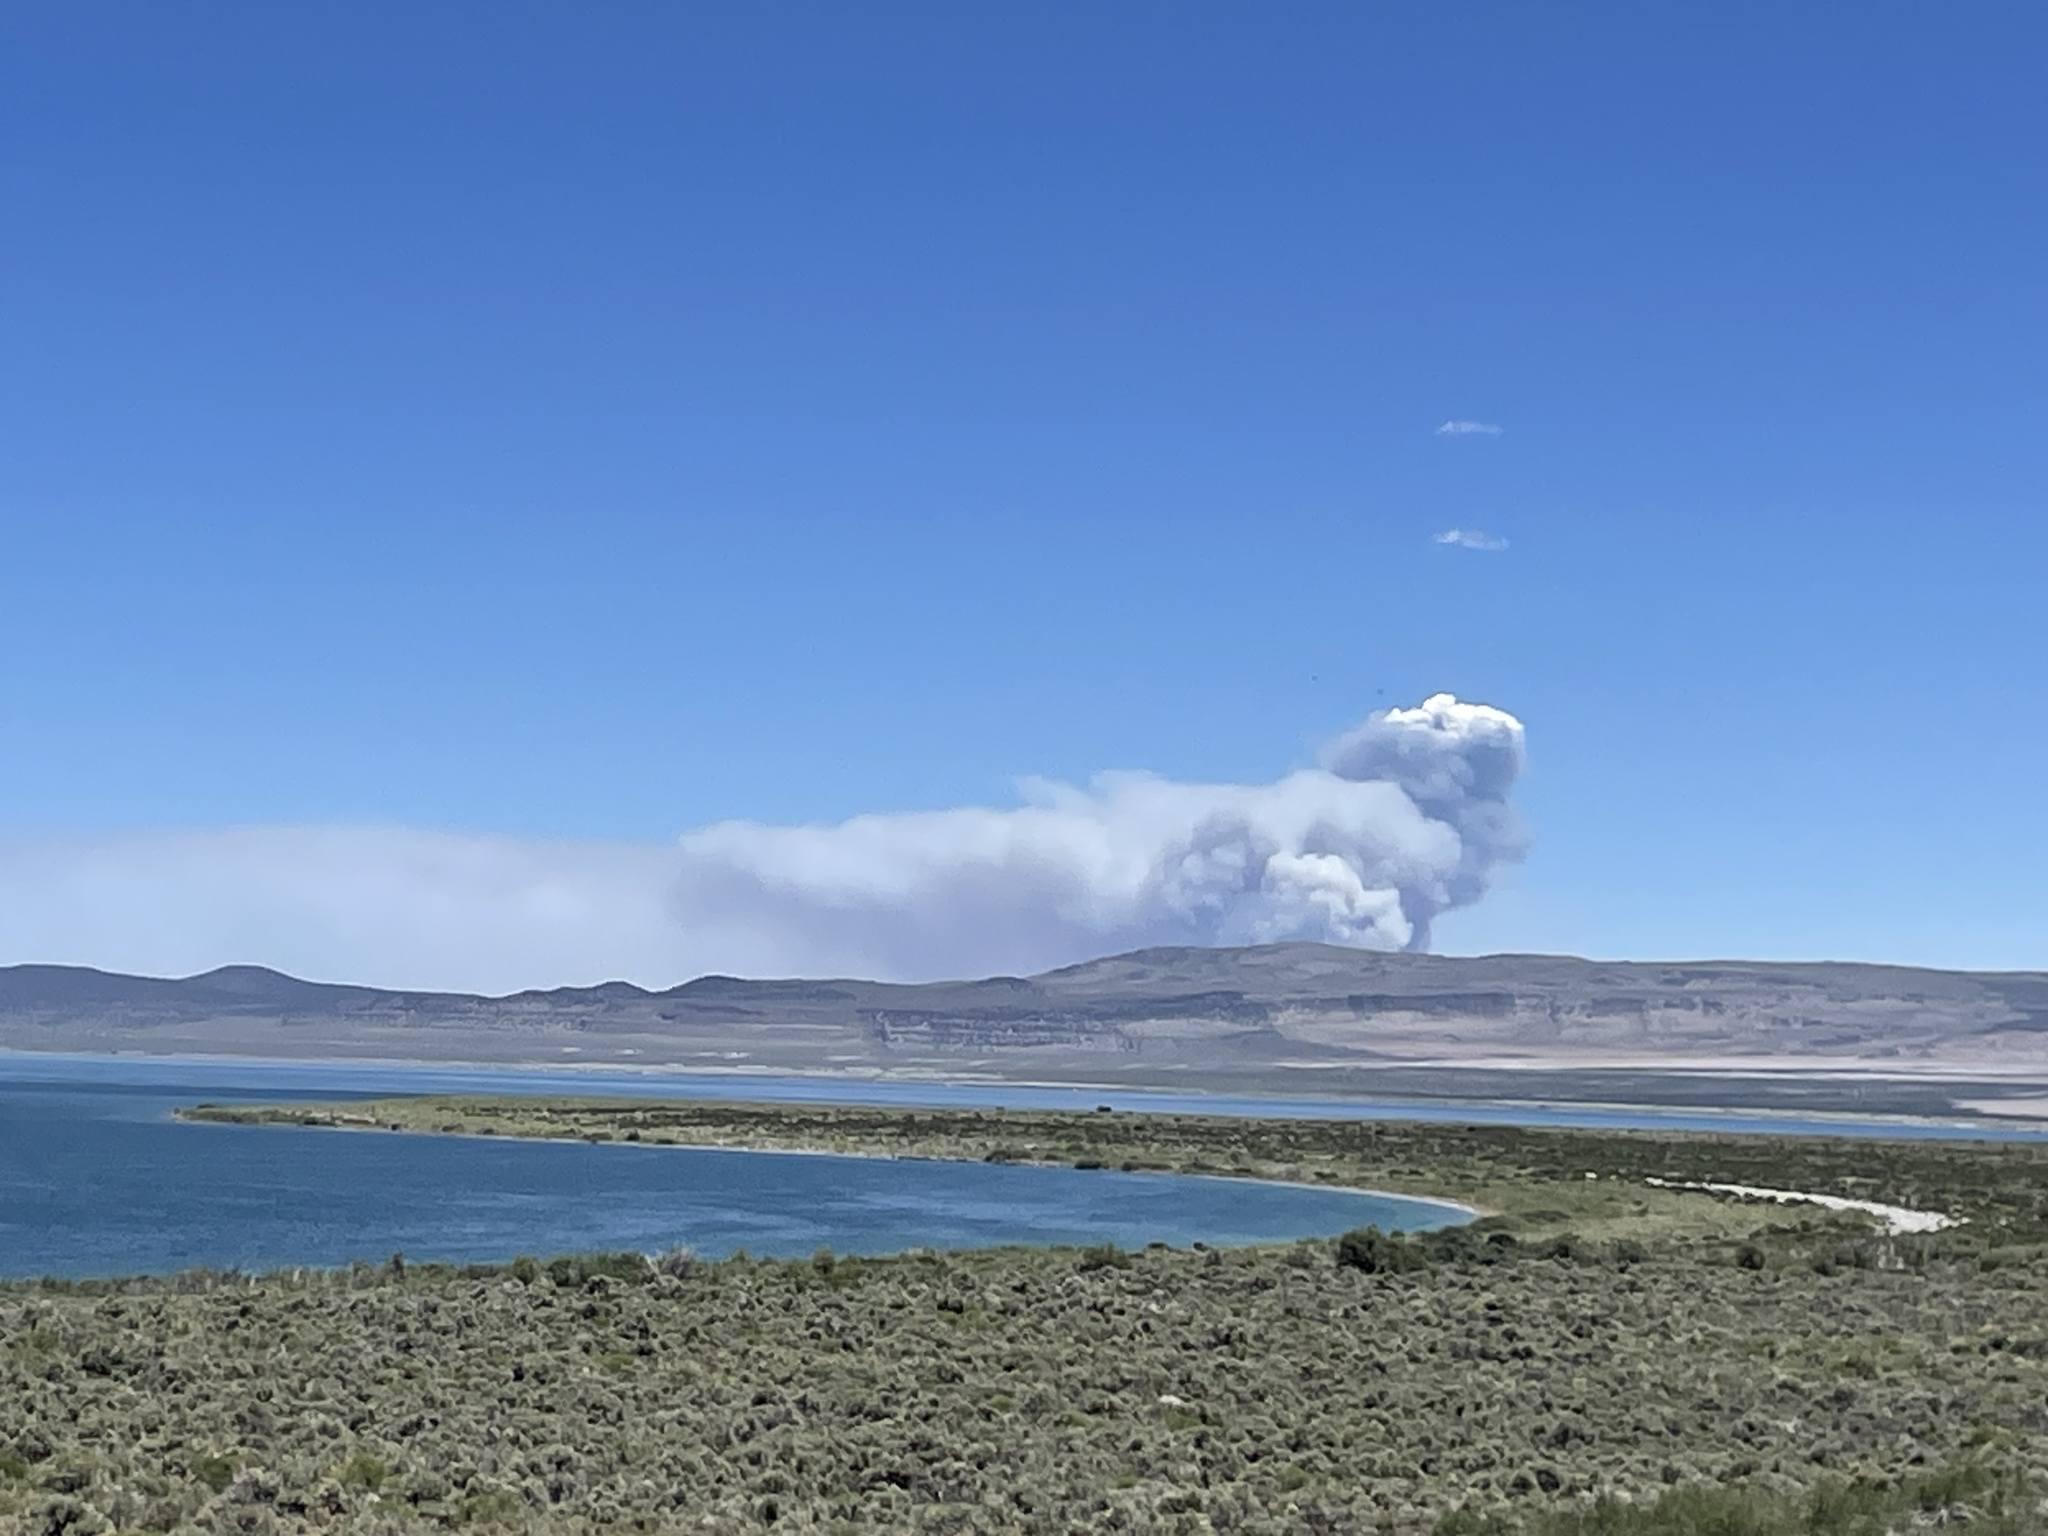 Pizona Fire, as seen from South Tufa area at Mono Lake. Smoke is visible in the distance over low hills with otherwise blue sky. 